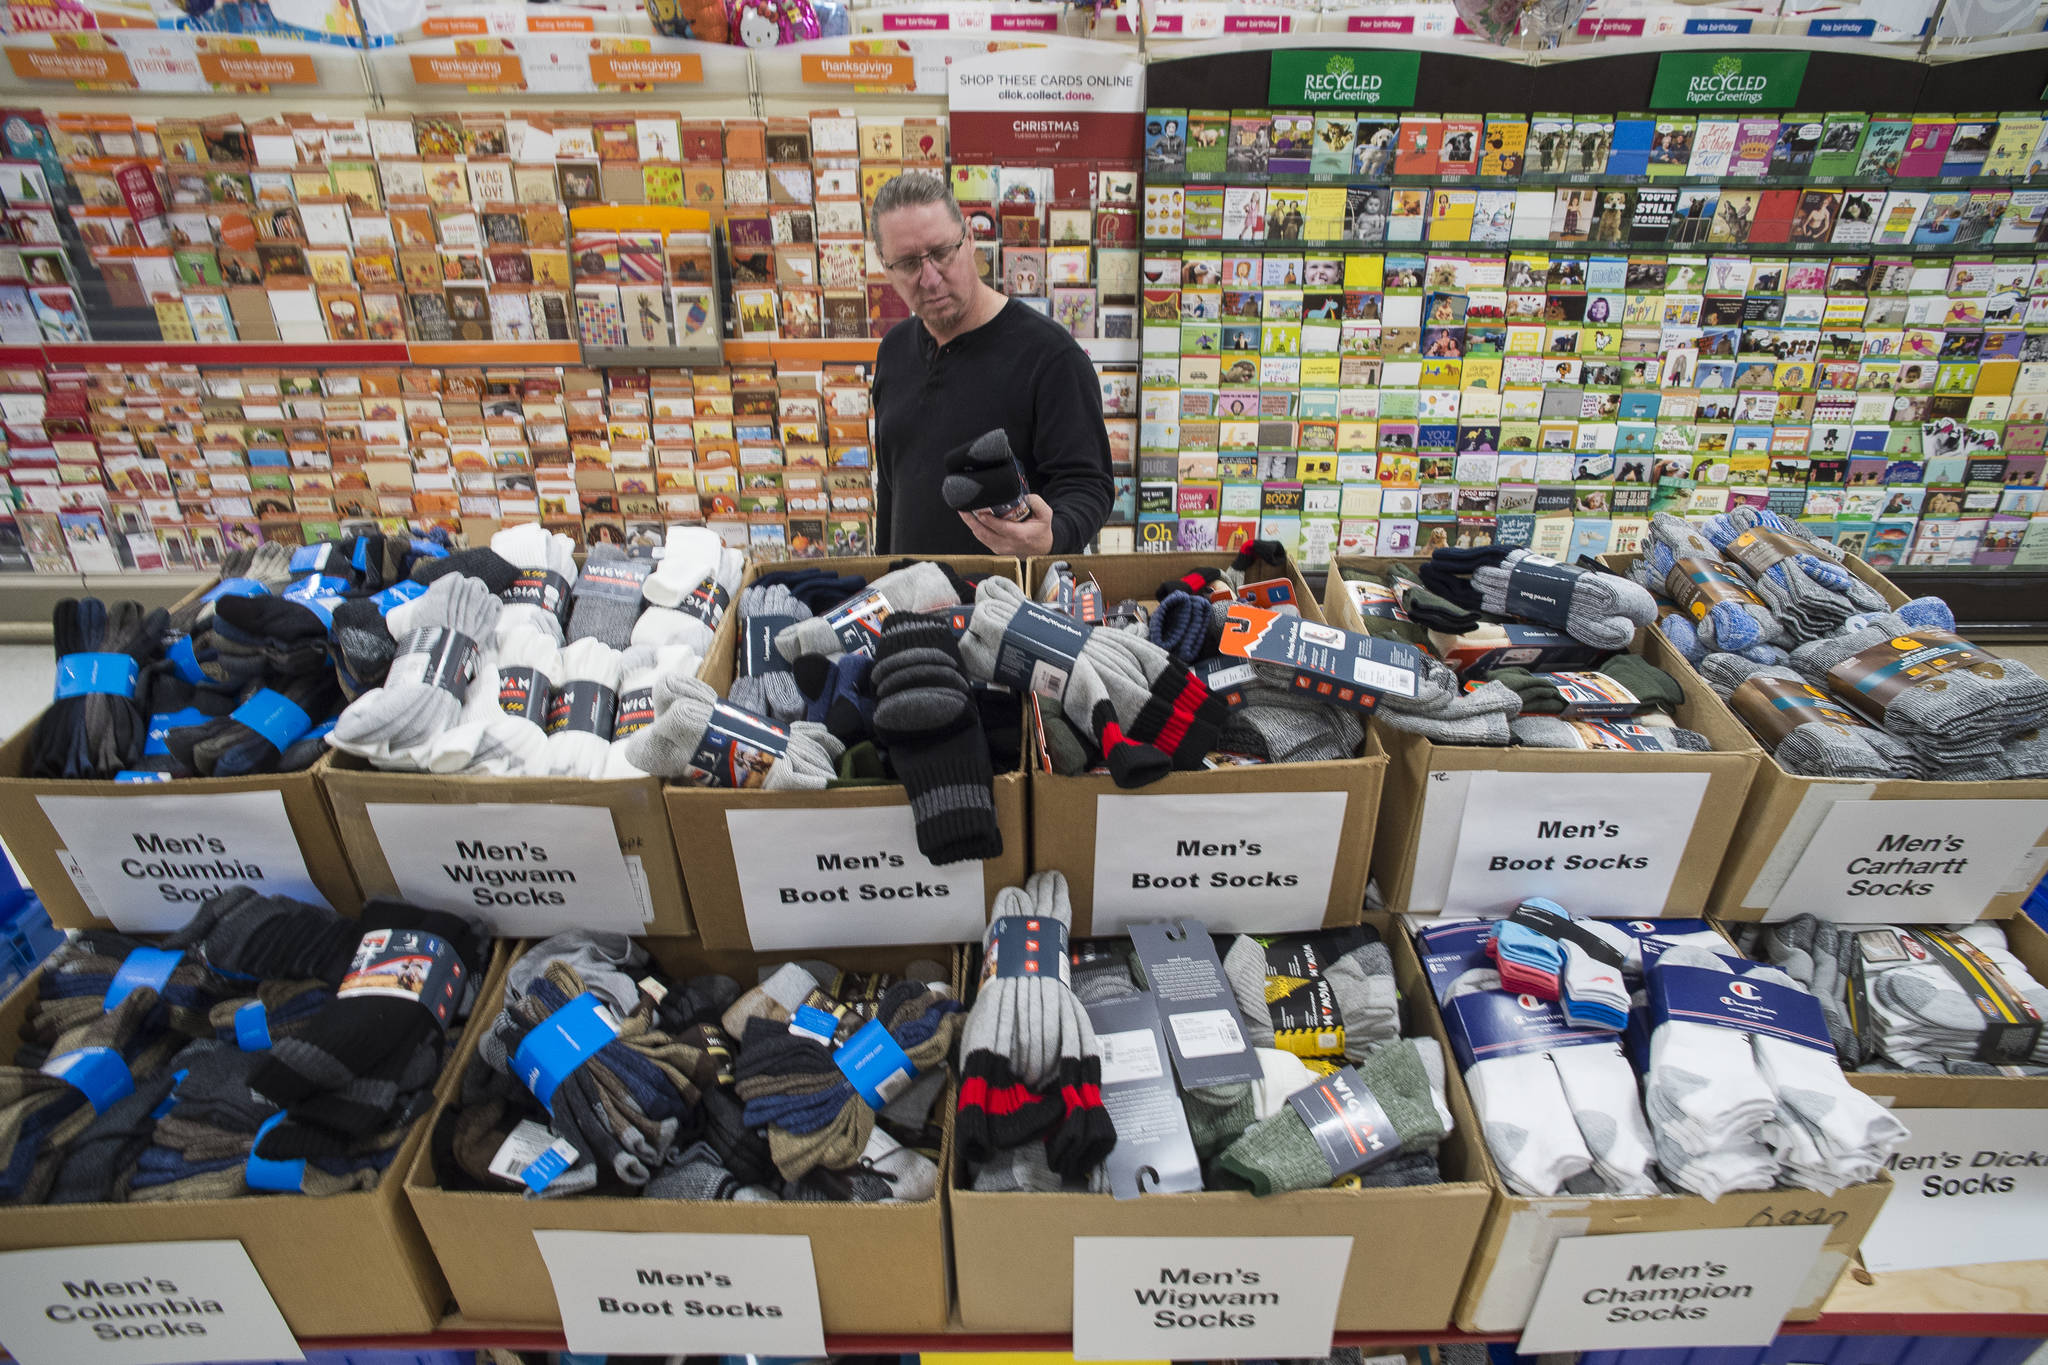 Jim Berry looks through the sock display put out for Black Friday sales at Fred Meyer on Wednesday, Nov. 21, 2018. (Michael Penn | Juneau Empire)